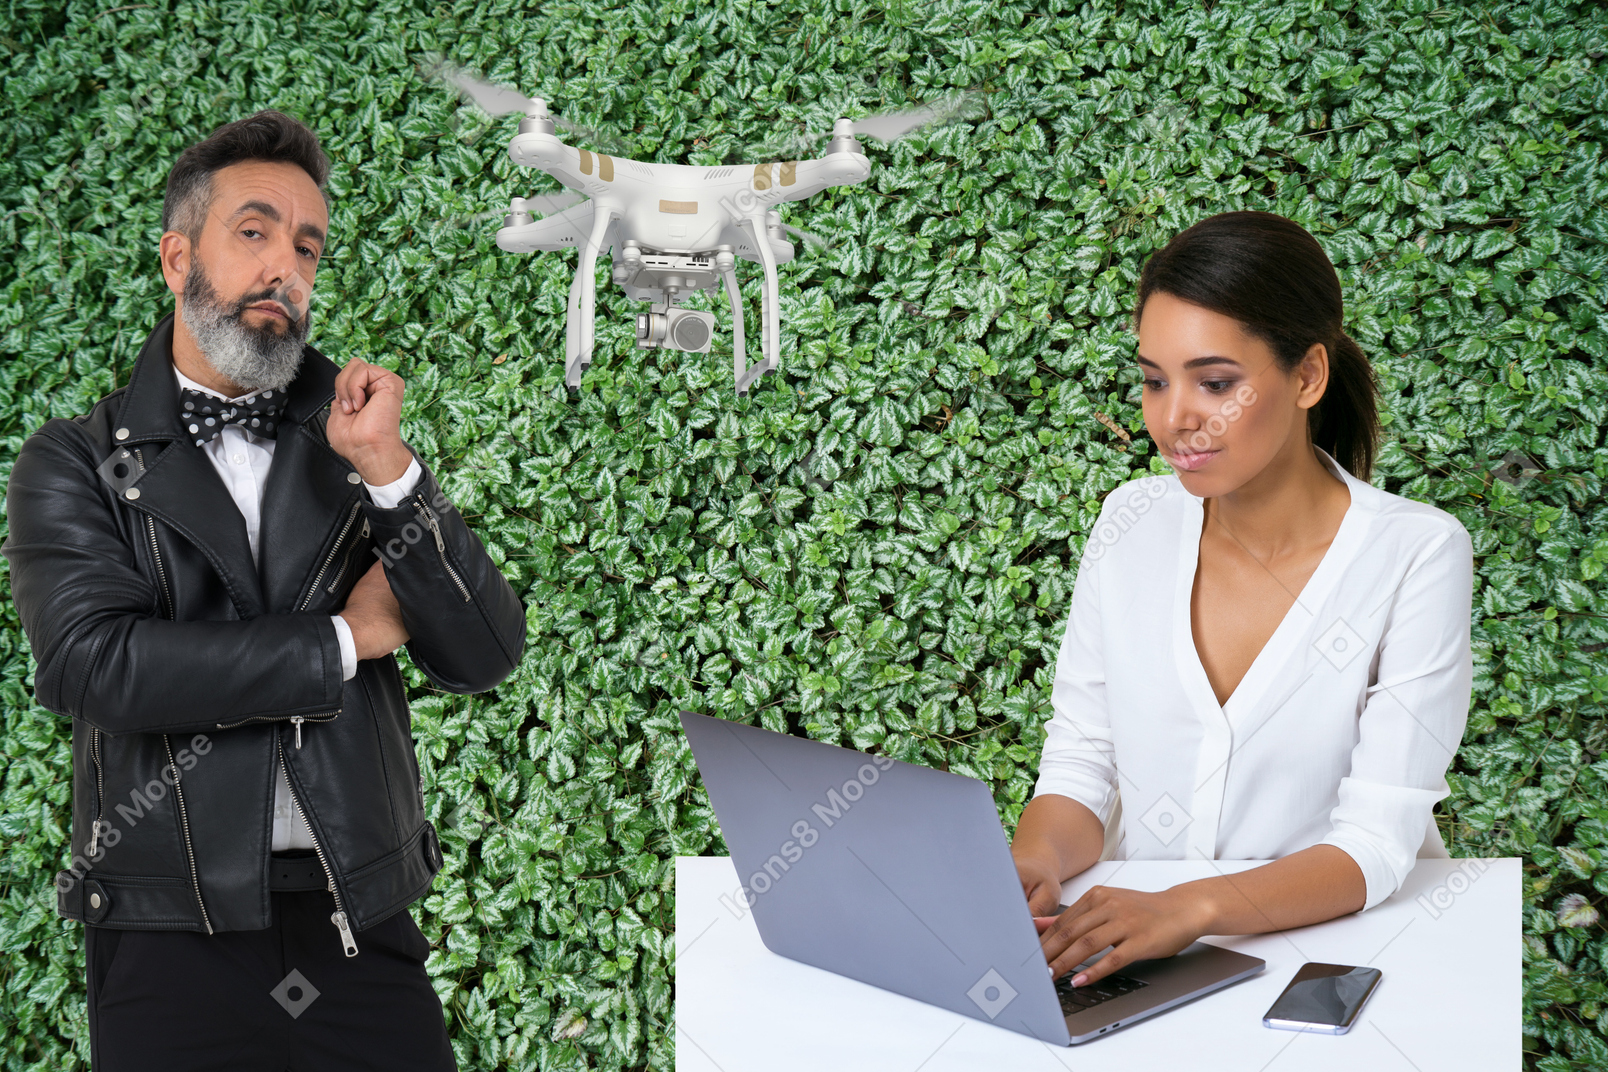 Man with a delivery drone next to a woman working